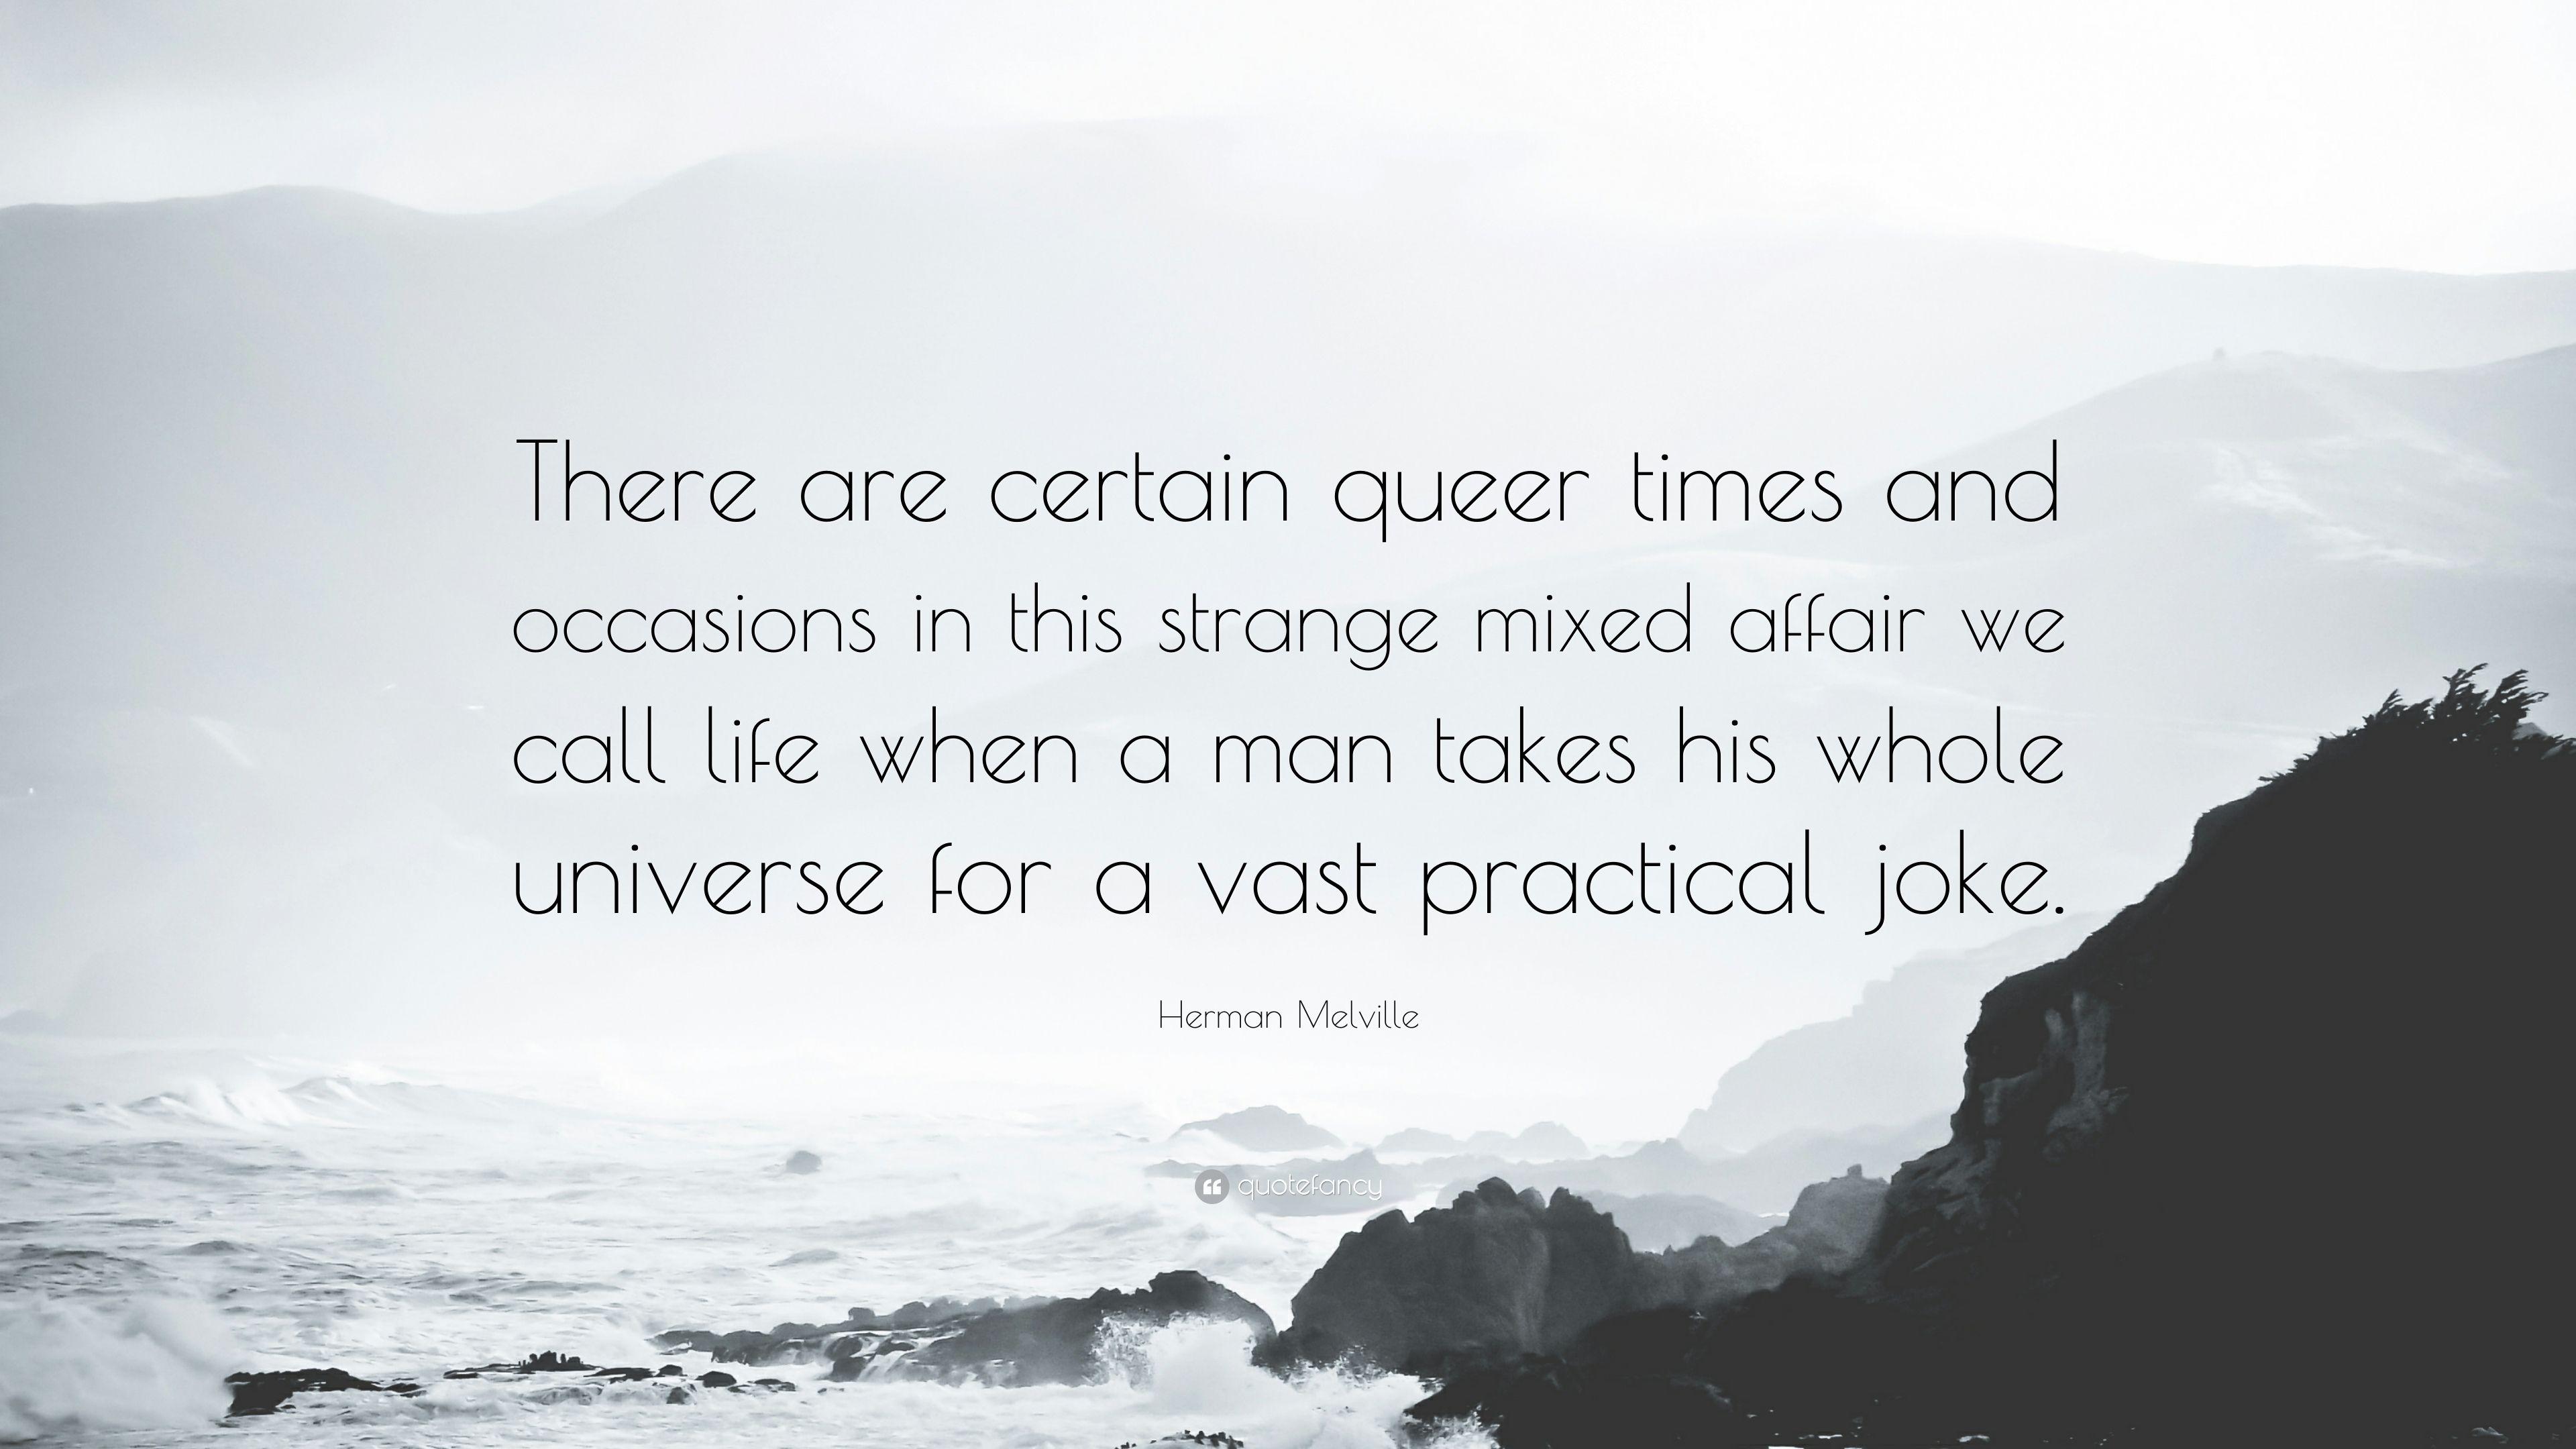 Herman Melville Quote: “There are certain queer times and occasions